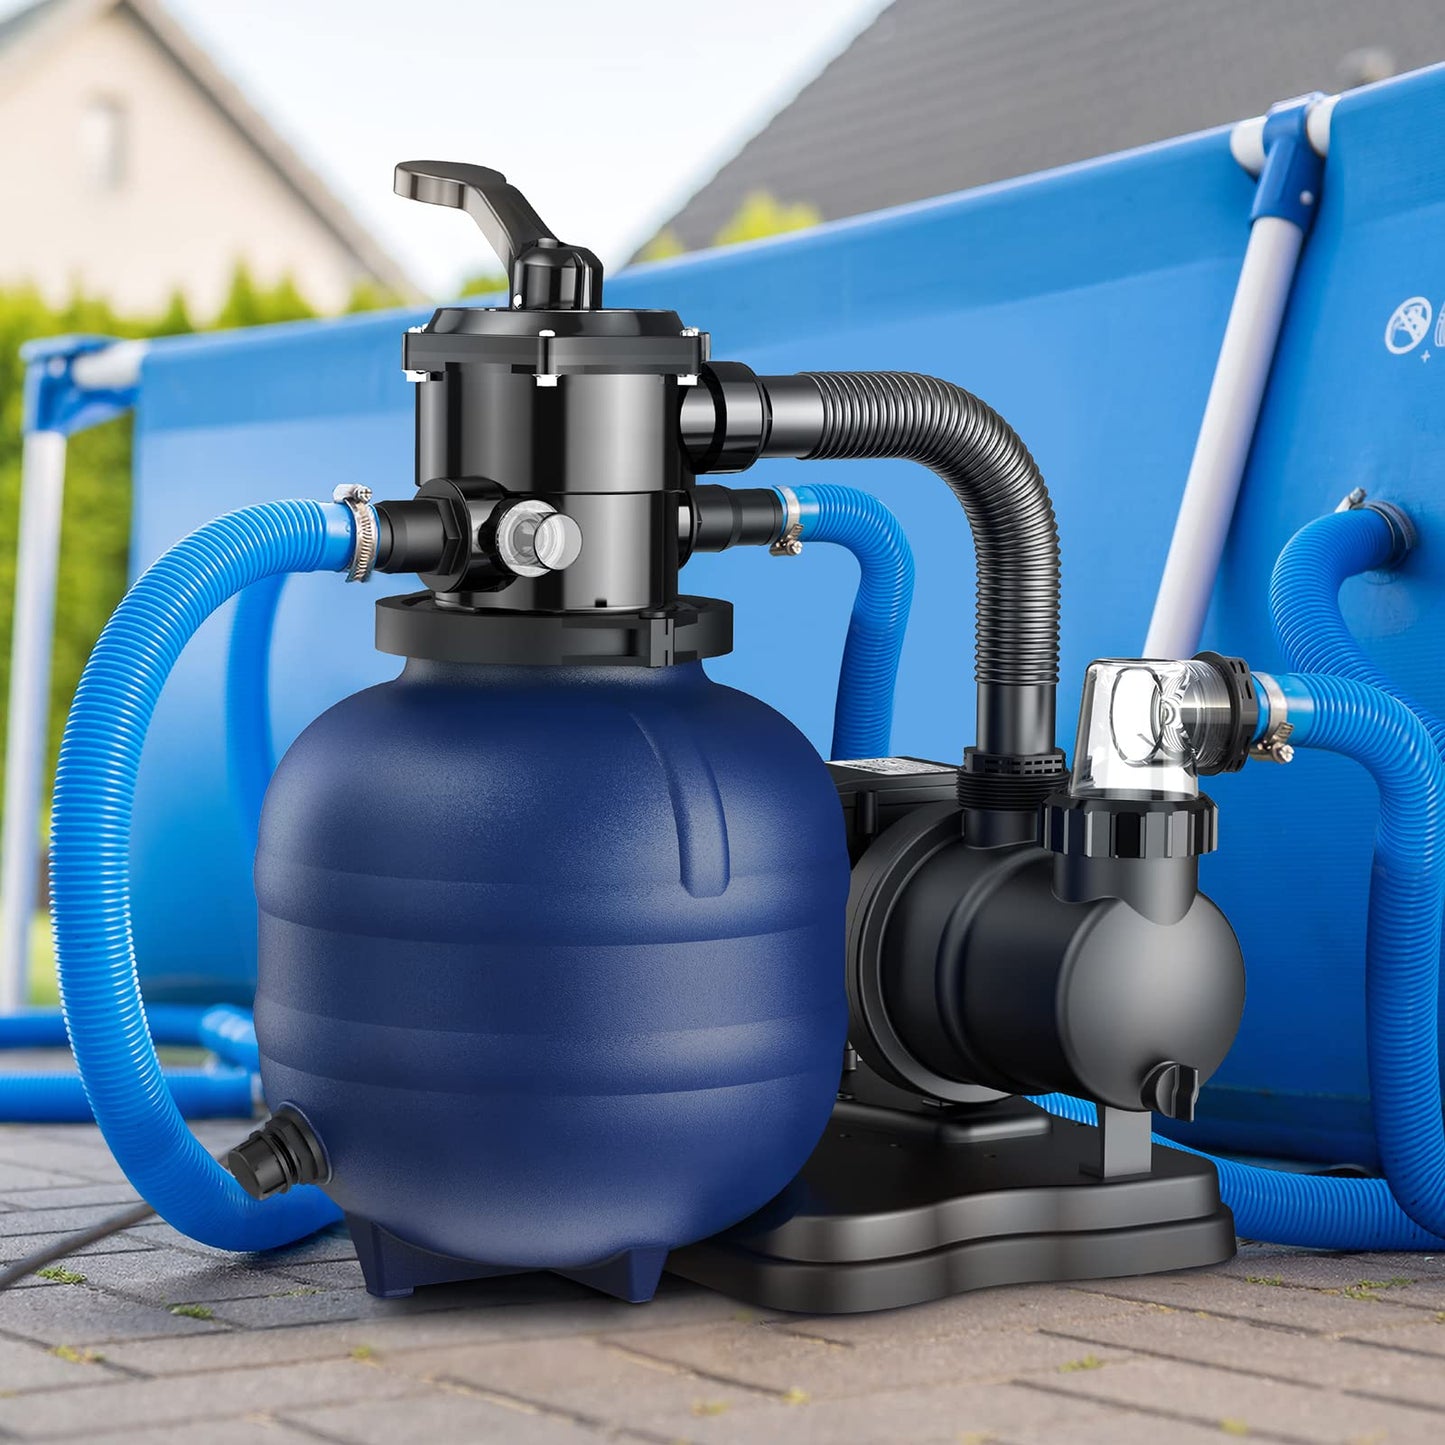 BLUBERY 14.4" Sand Filter with 1/2HP Prefilter Pump System, Handy 7-Way Valve for Above Ground Pools with Pool Pump, 115V, 23FT Cord for Easy Installation, GSF02A